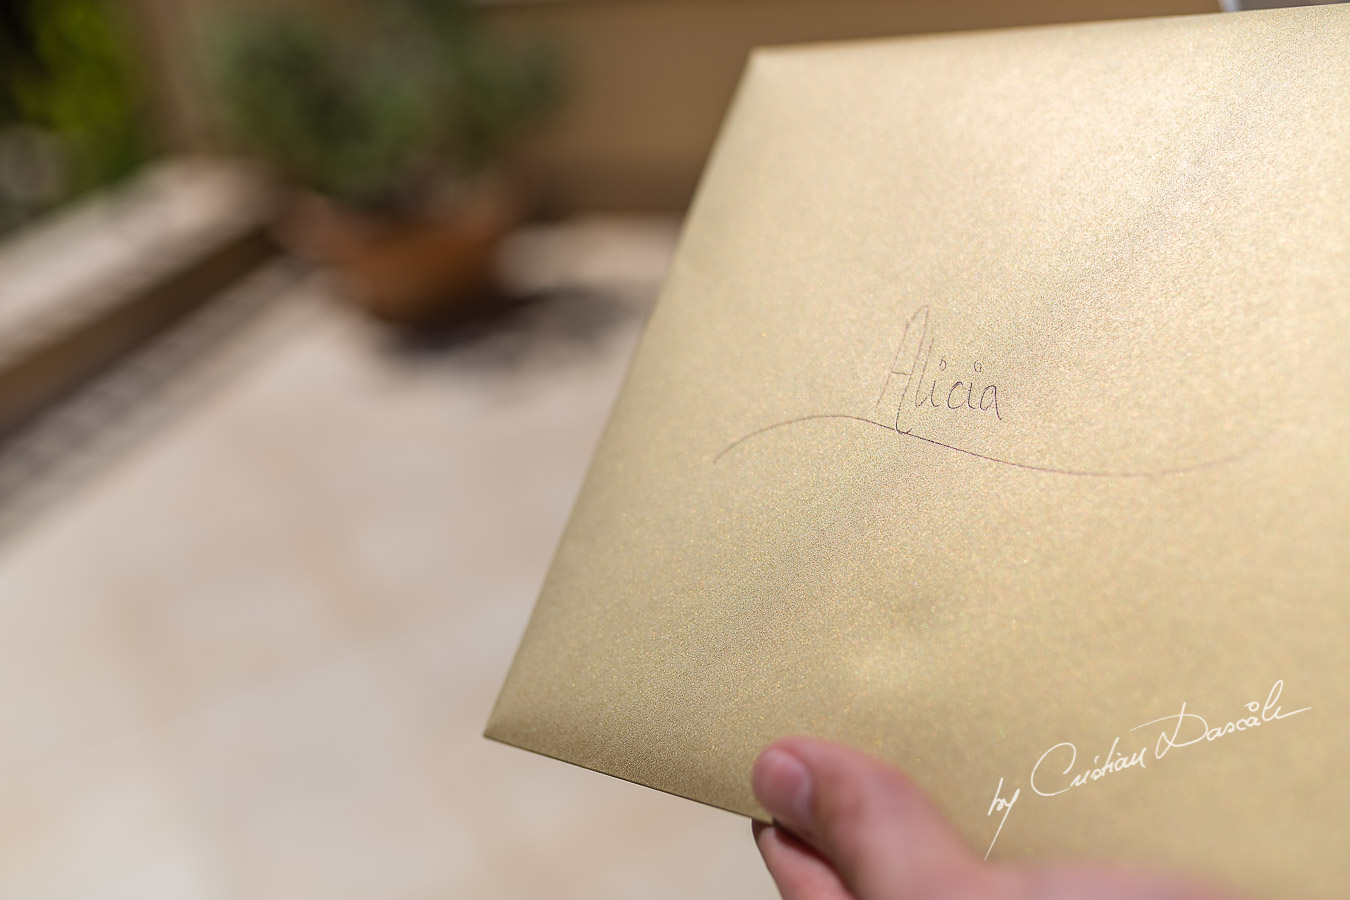 The envelop is given to the Bride by the Bestman captured at Aphrodite Hills Resort before the wedding ceremony by Cristian Dascalu.